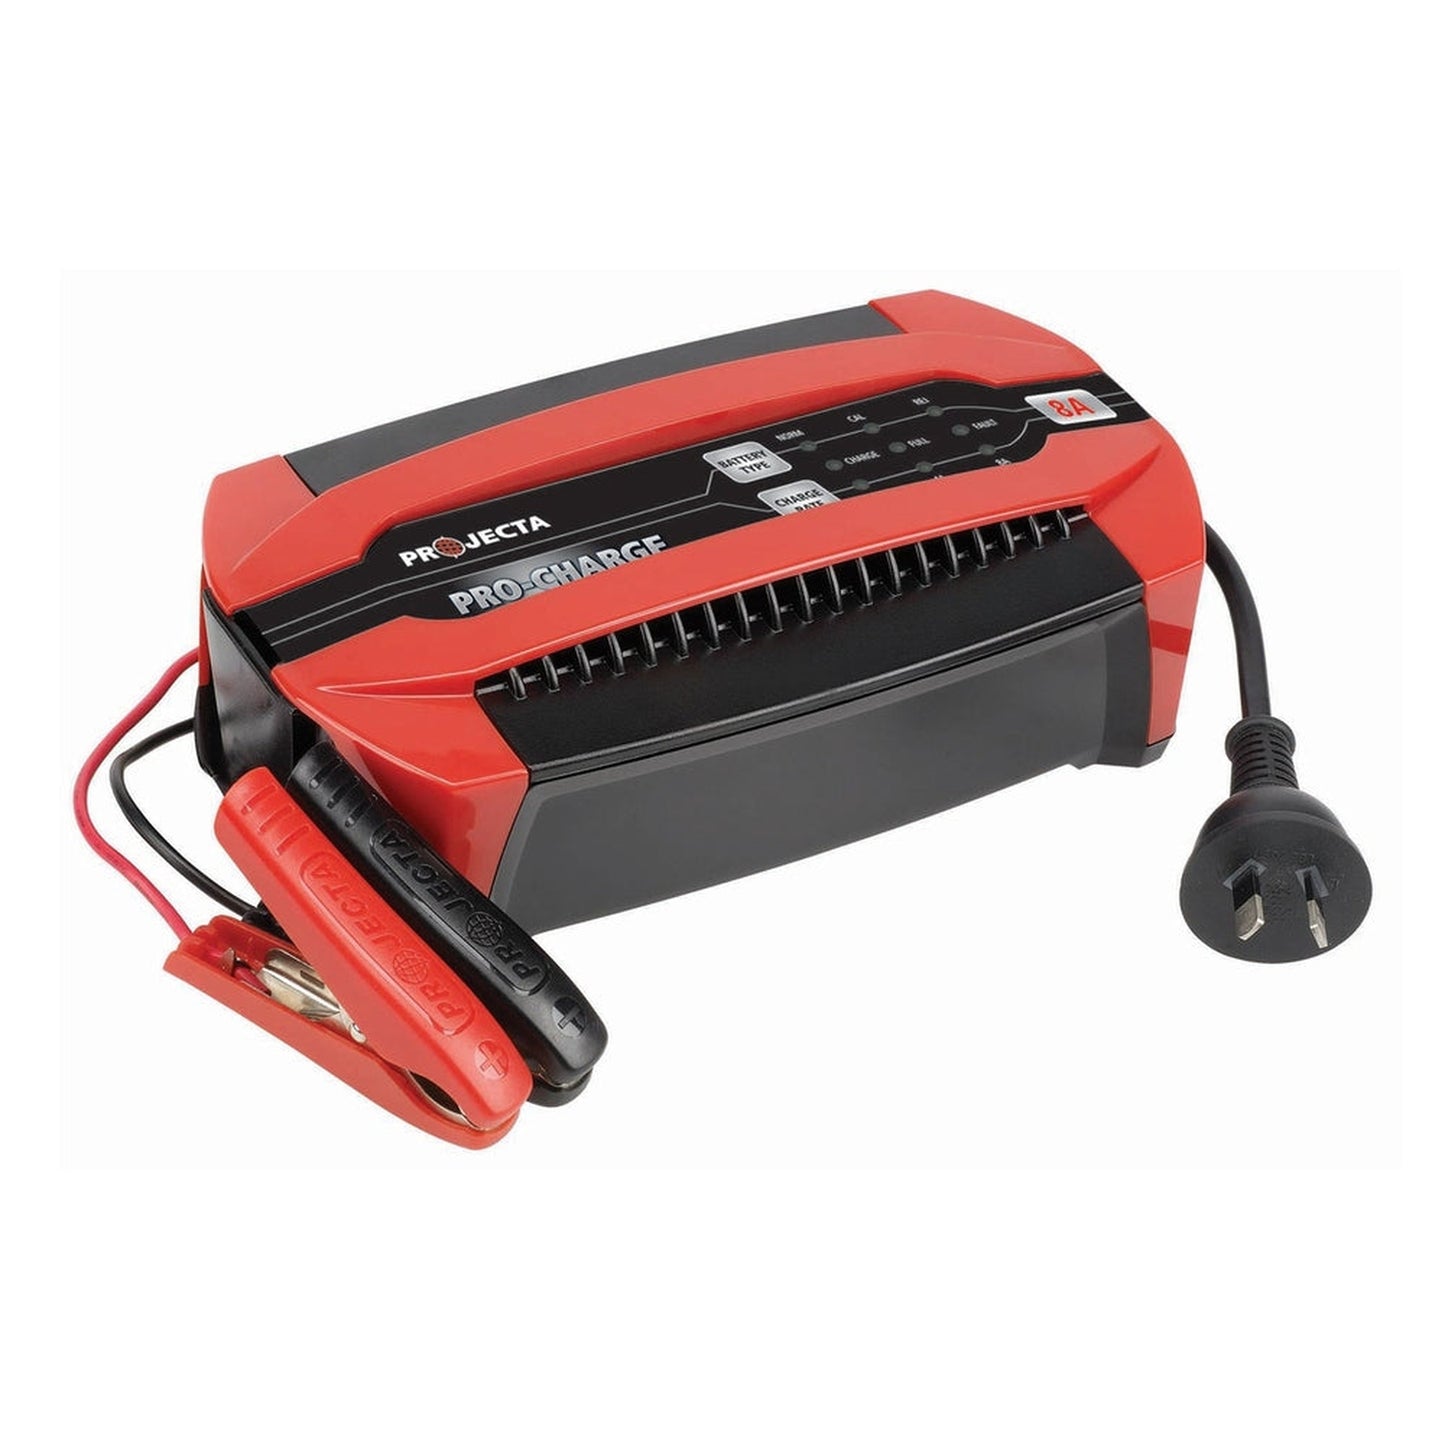 12V AUTOMATIC 8A 6 STAGE BATTERY CHARGER PC800